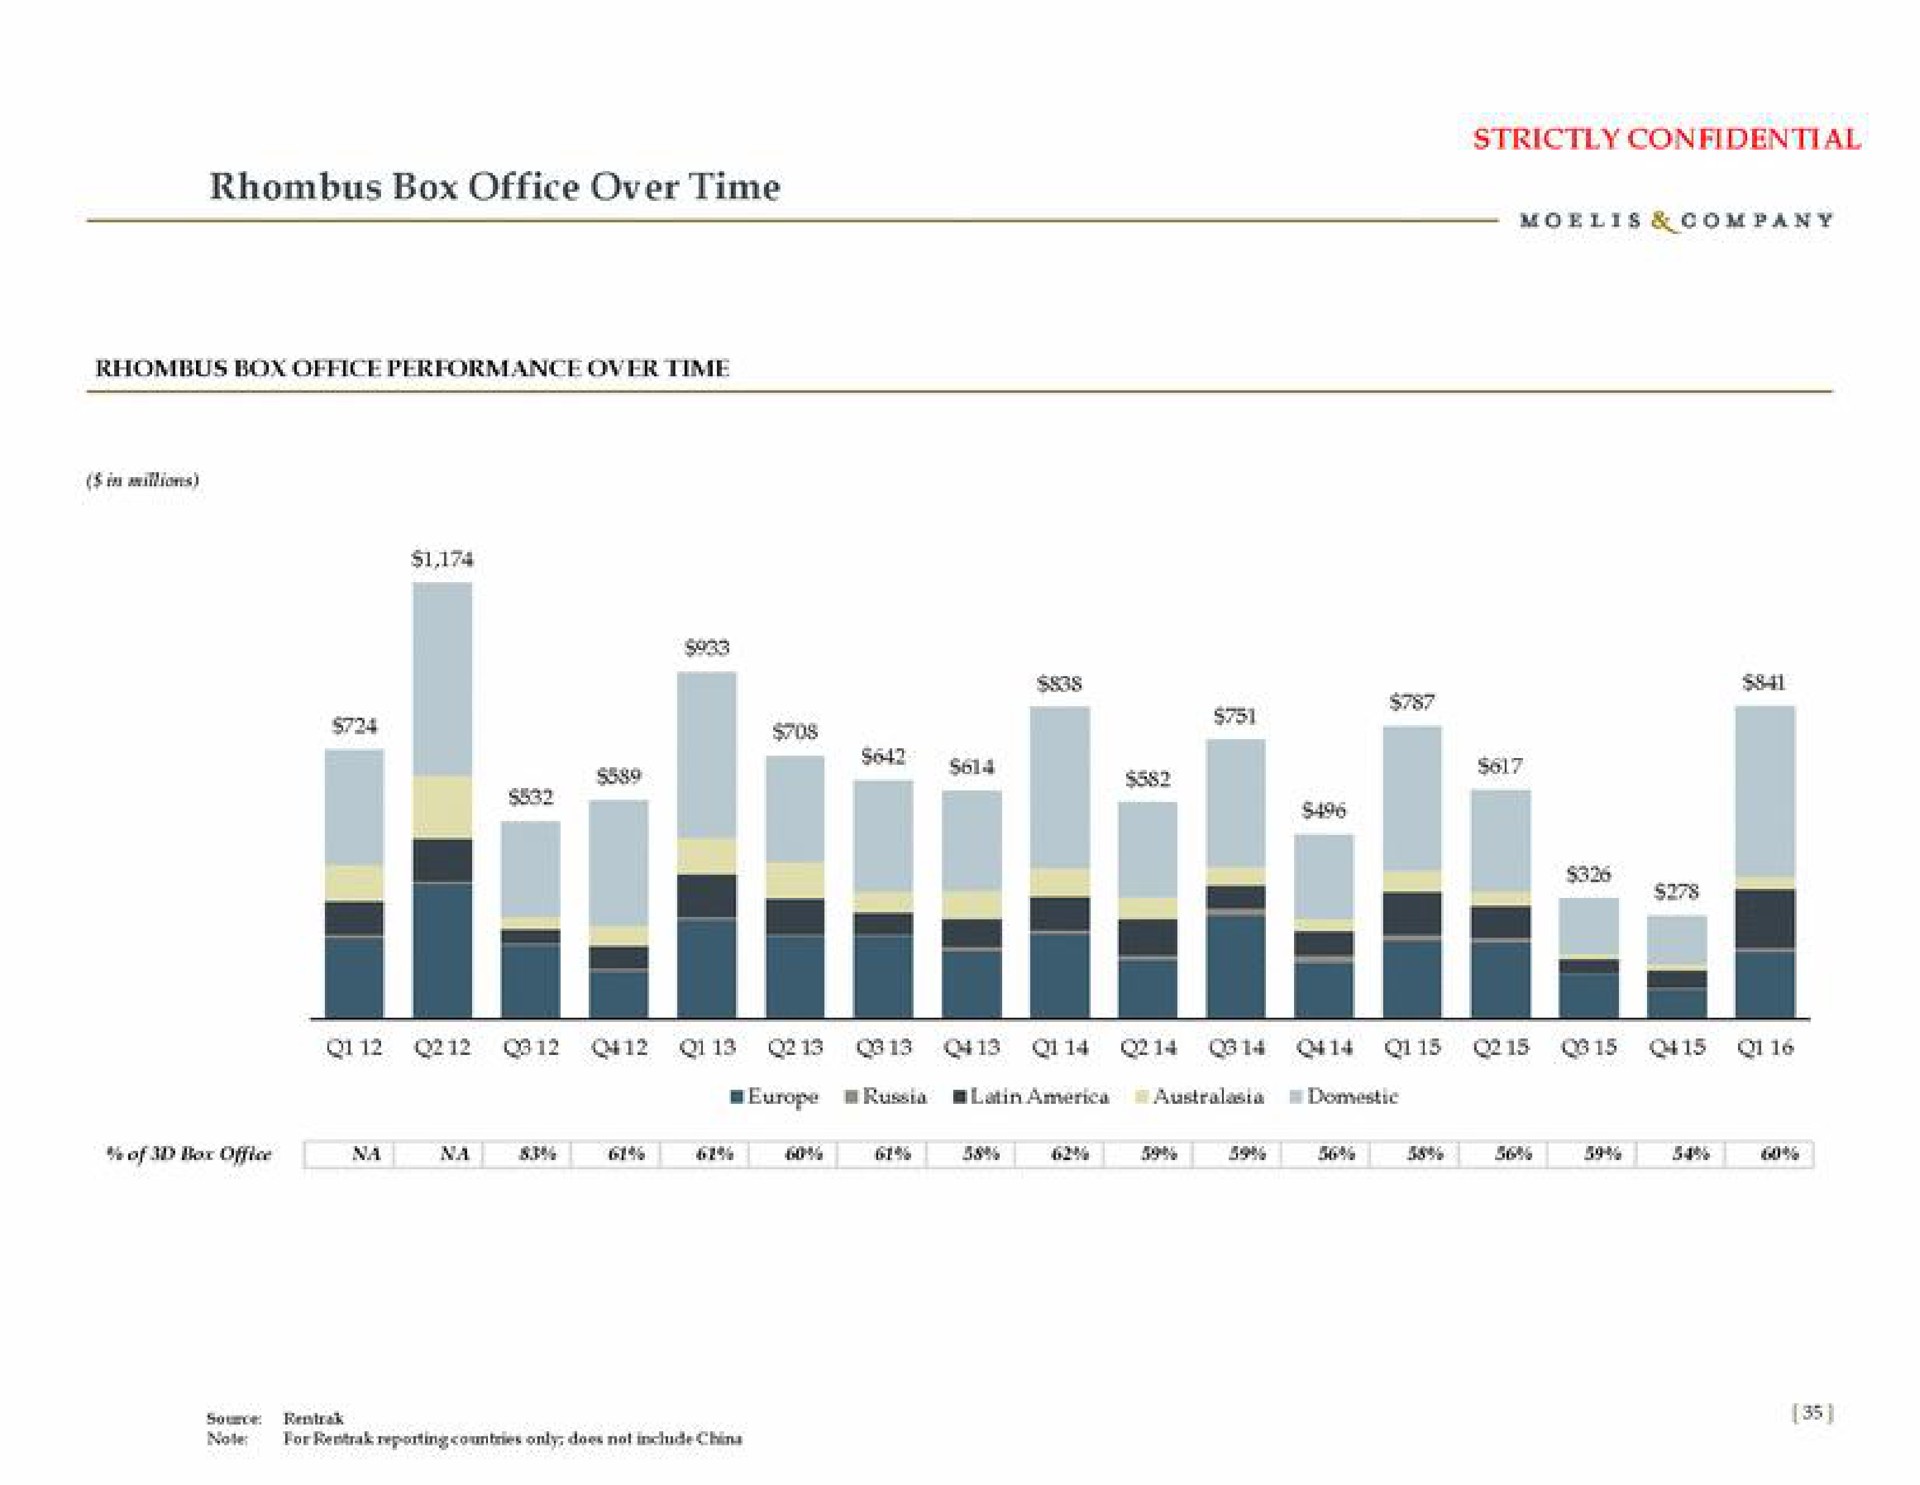 rhombus box office over time strictly confidential | Moelis & Company